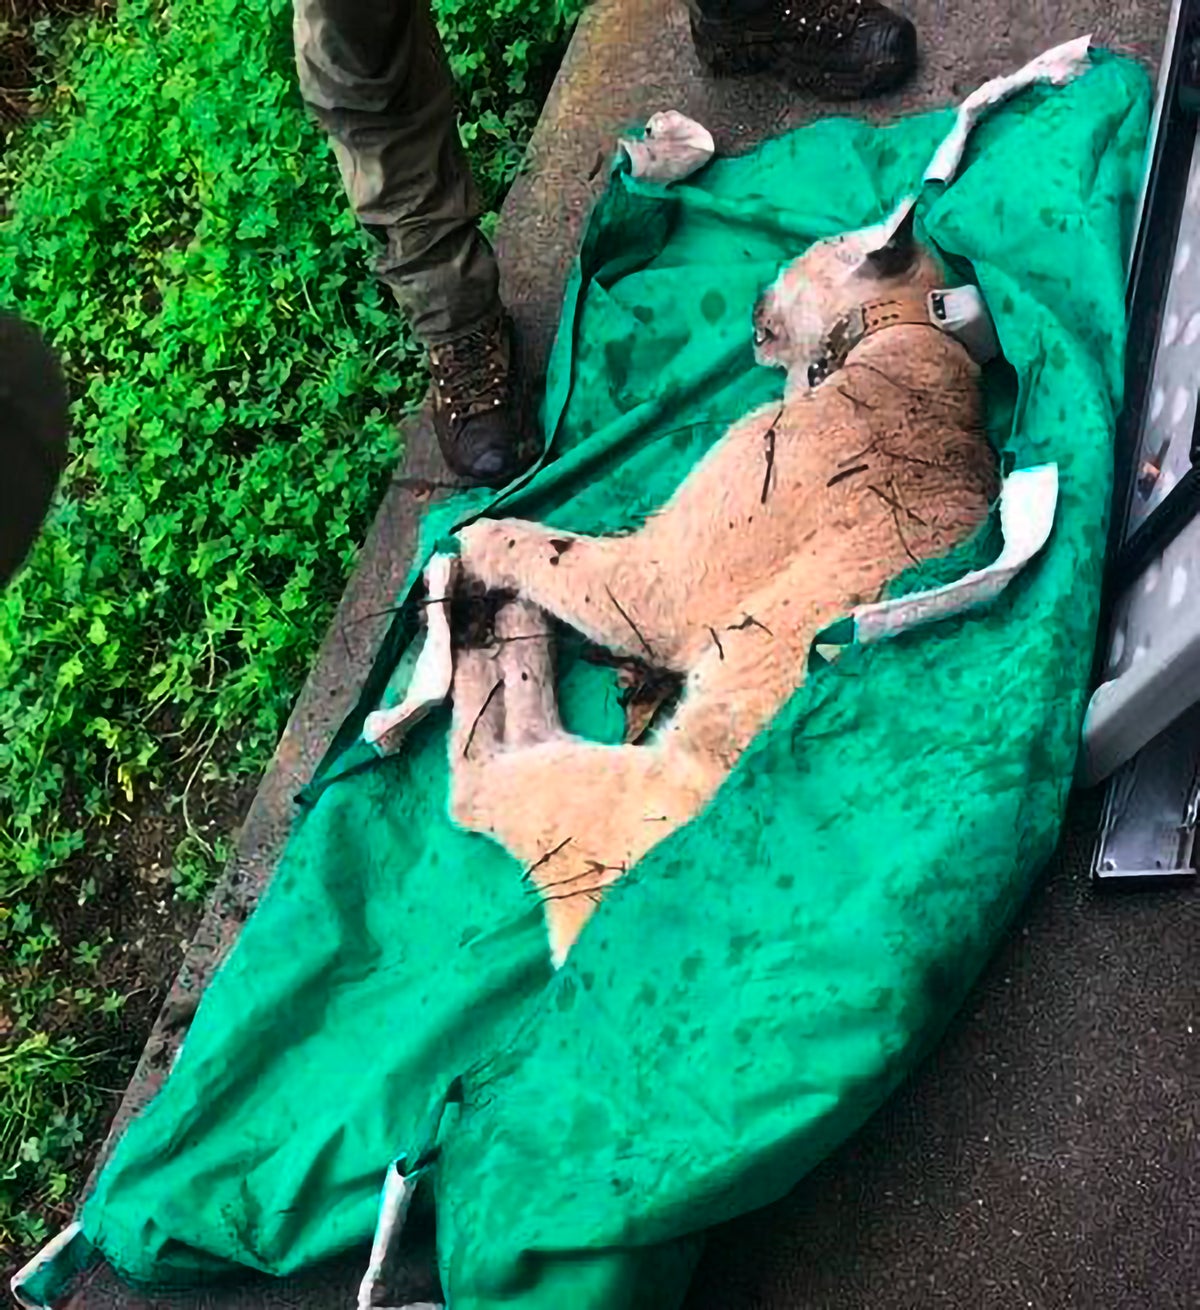 Exam finds famed LA mountain lion may have been hit by car